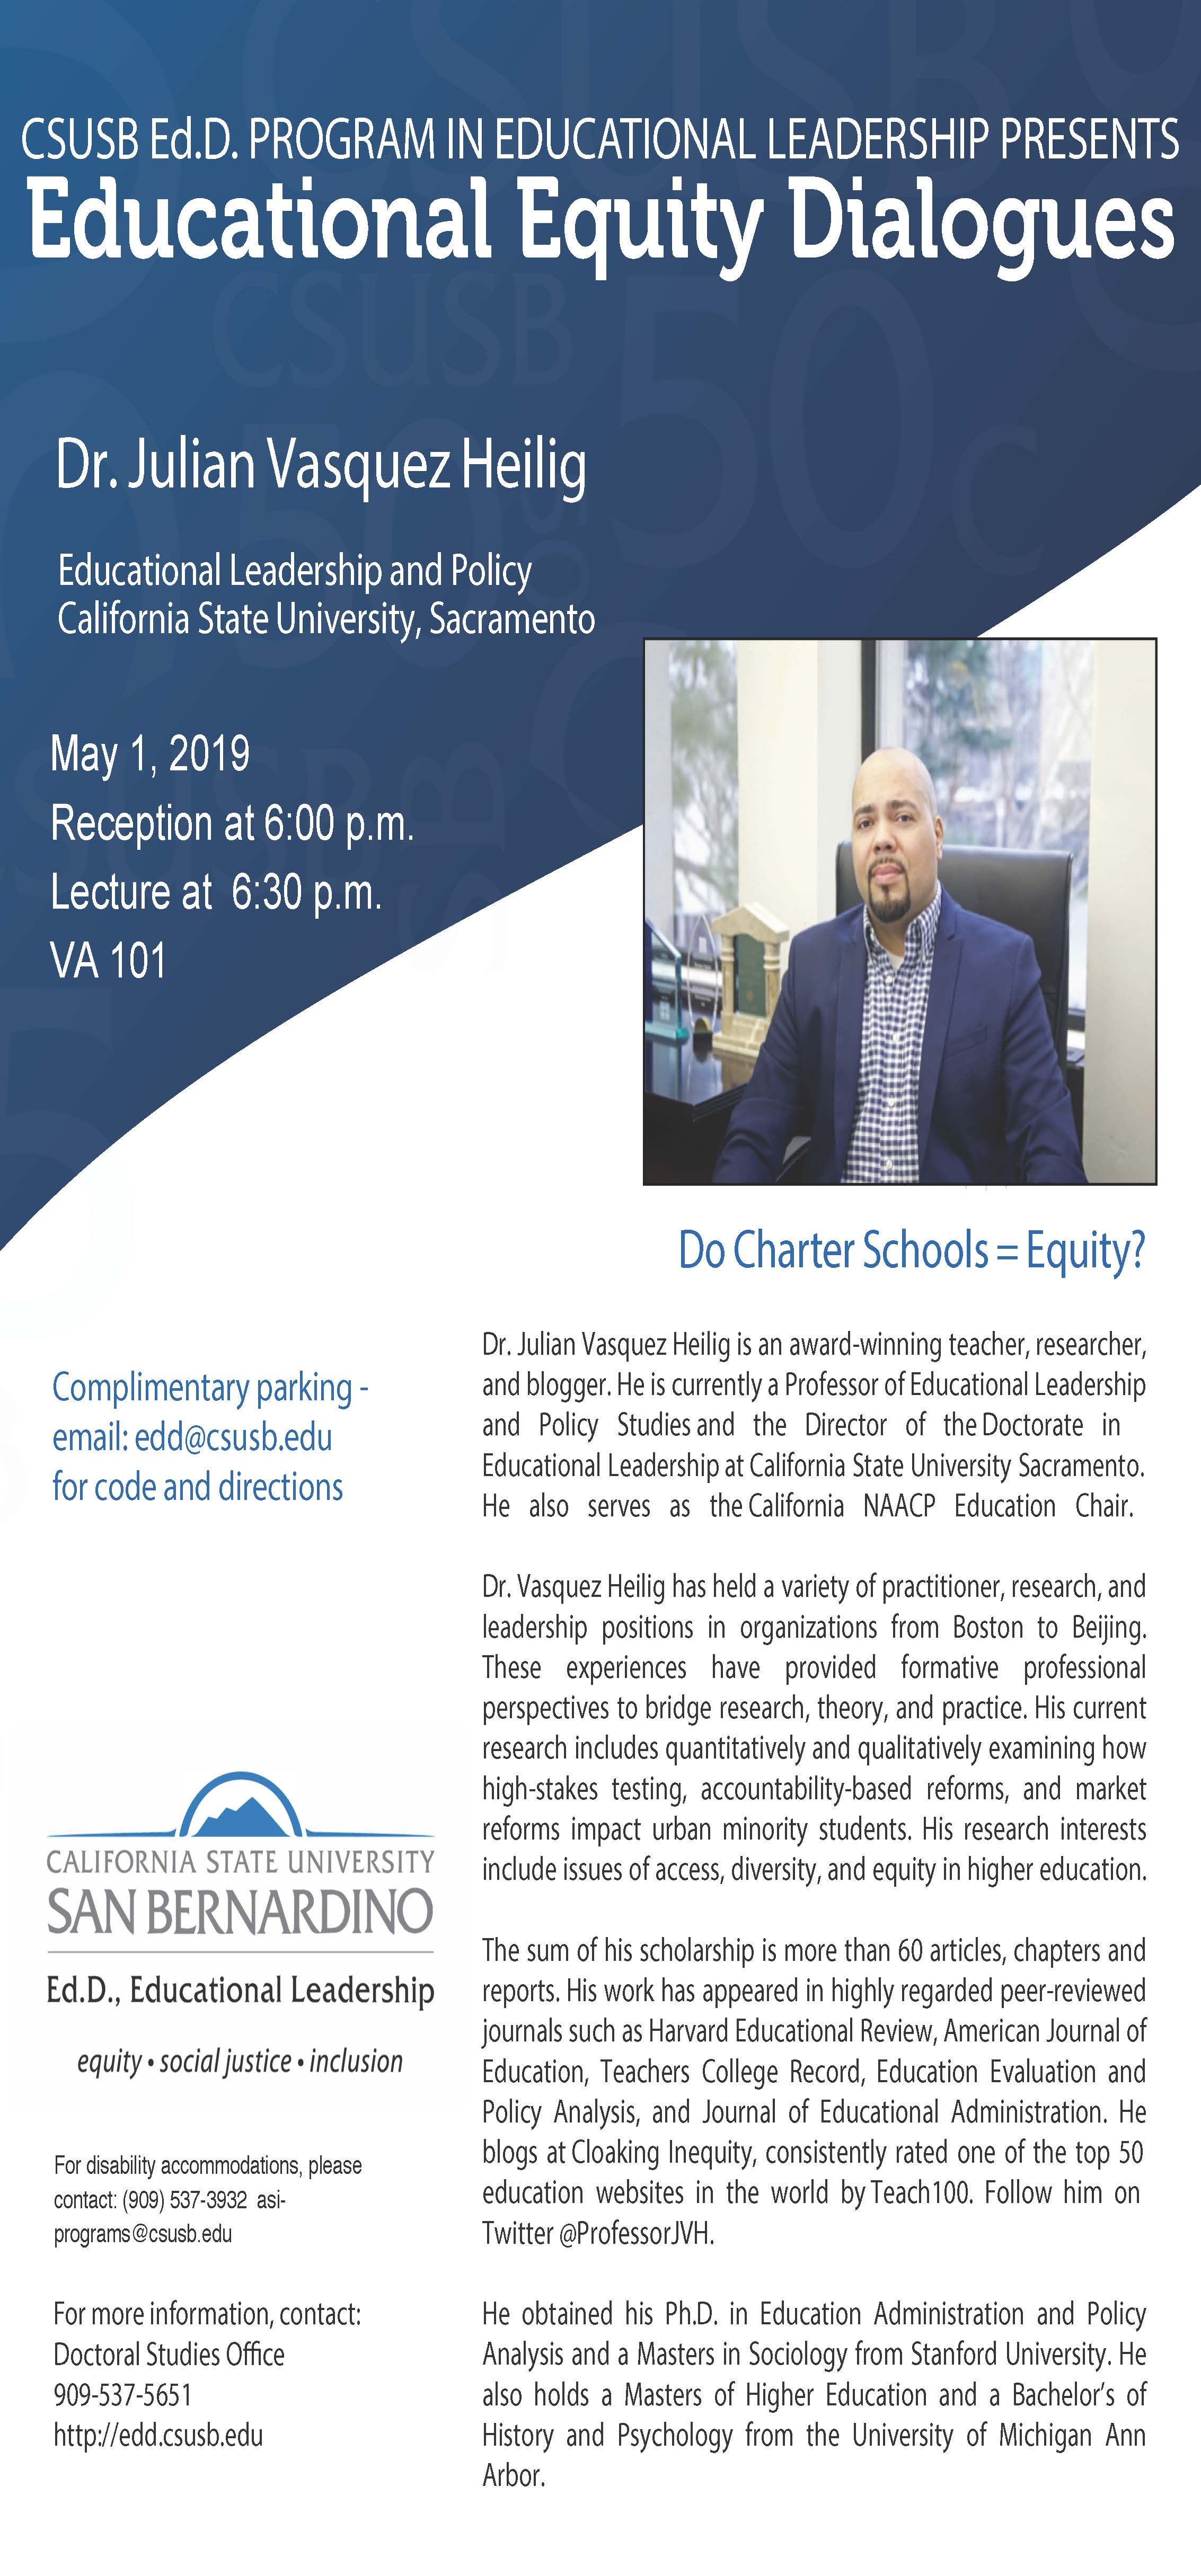 CSUSB Doctorate in Educational Leadership program hosts Educational Equity Dialogues